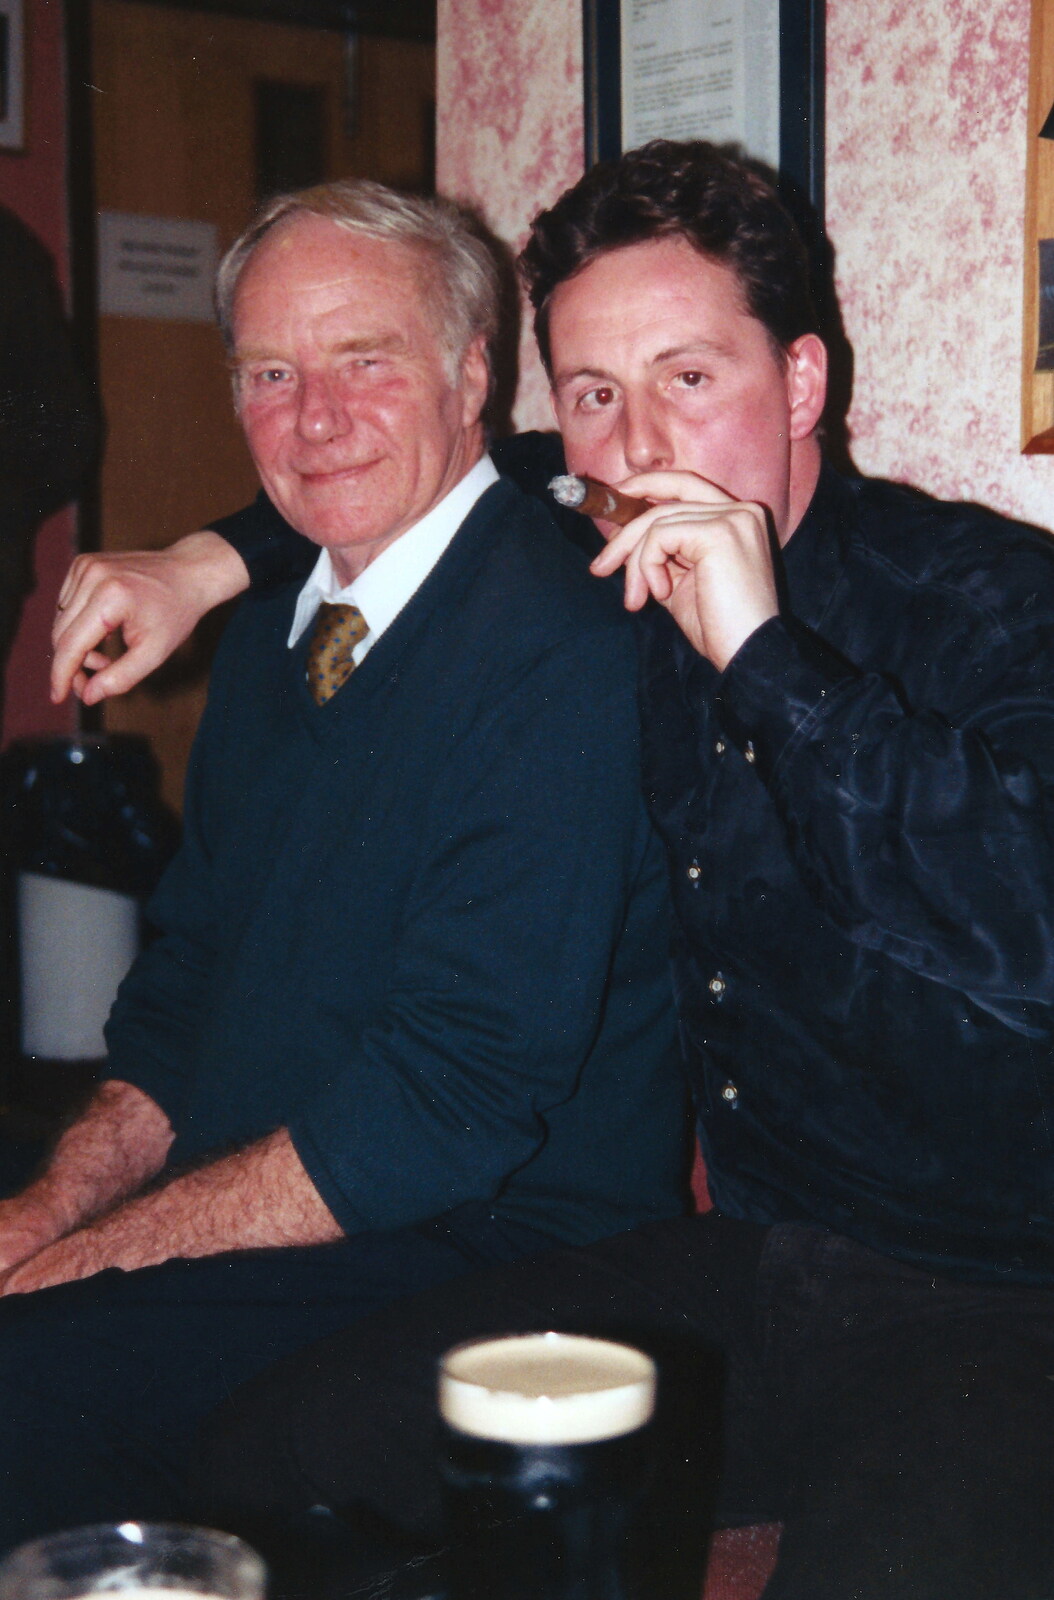 The Grandad Archive, Various Locations - 7th January 2023: The old man with a dude and a cigar